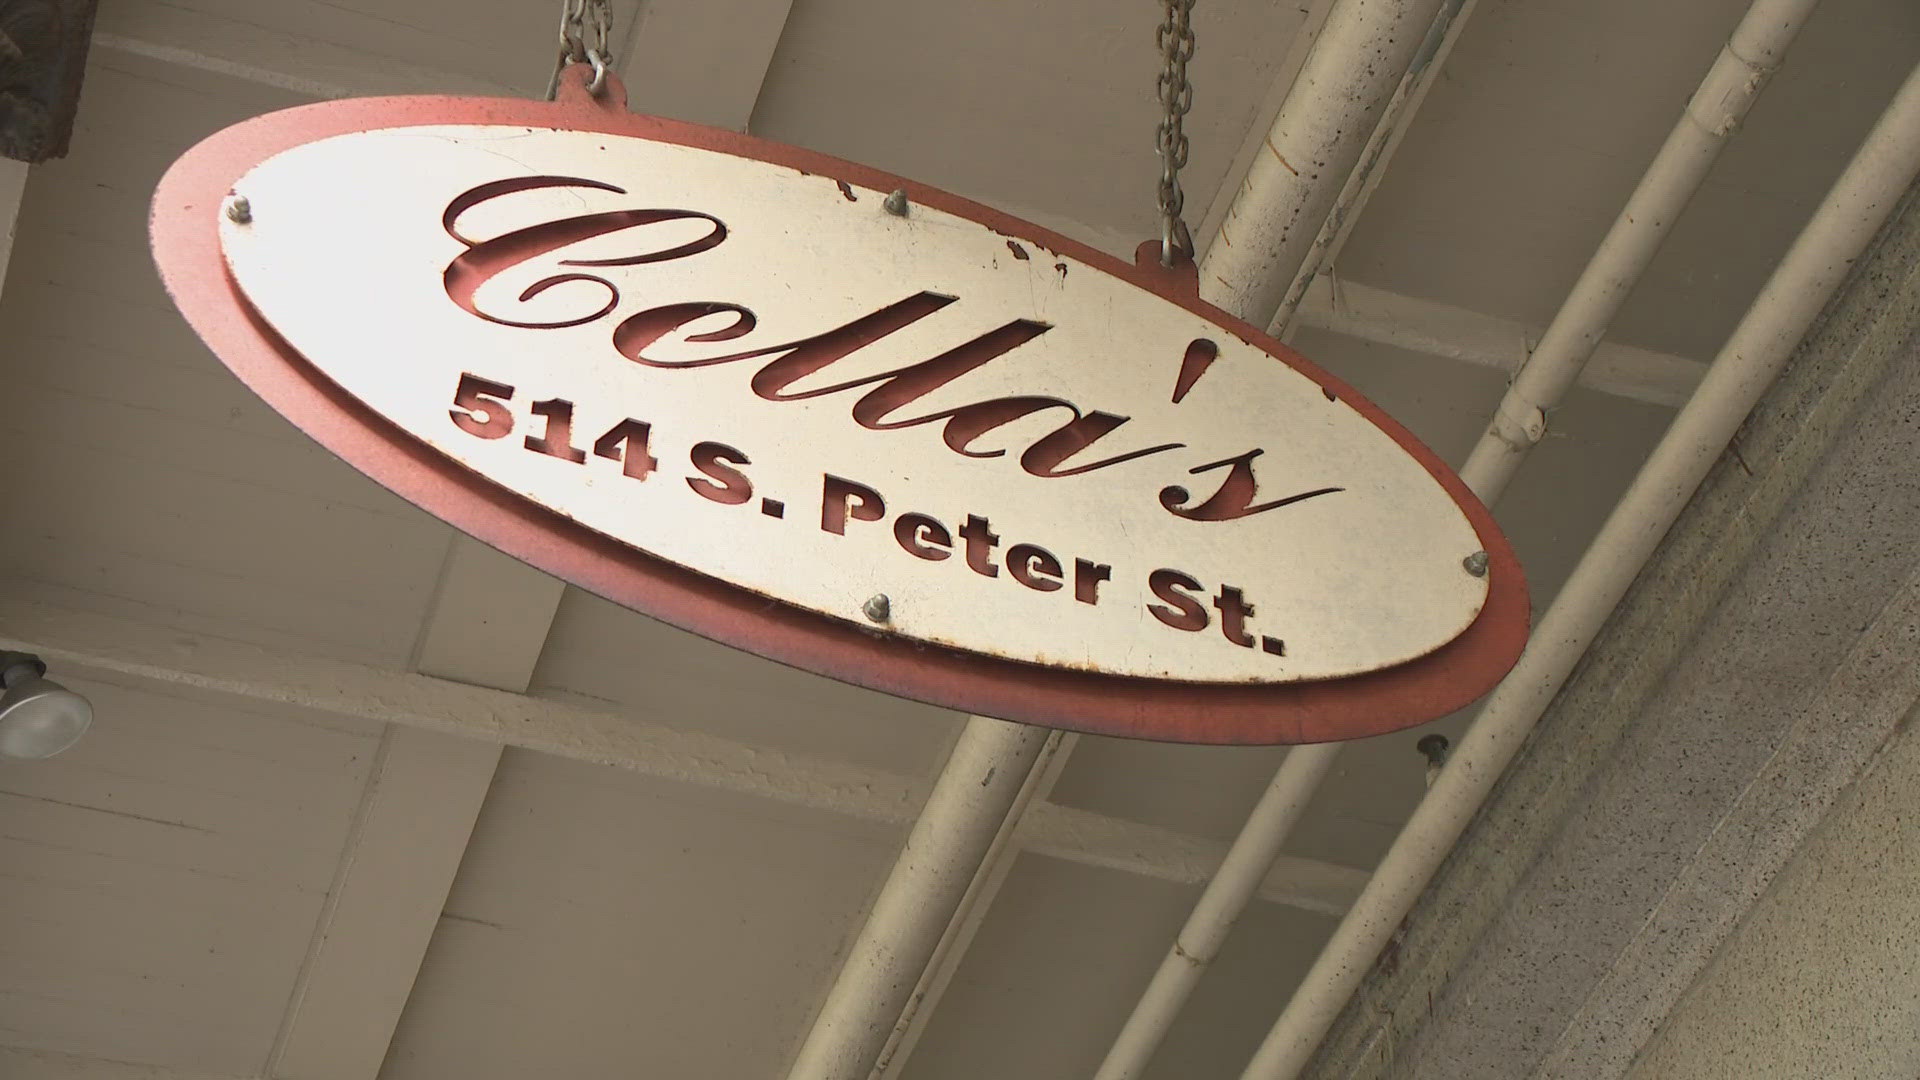 NOPD is investigating the incident at Celia's Boutique on Friday.